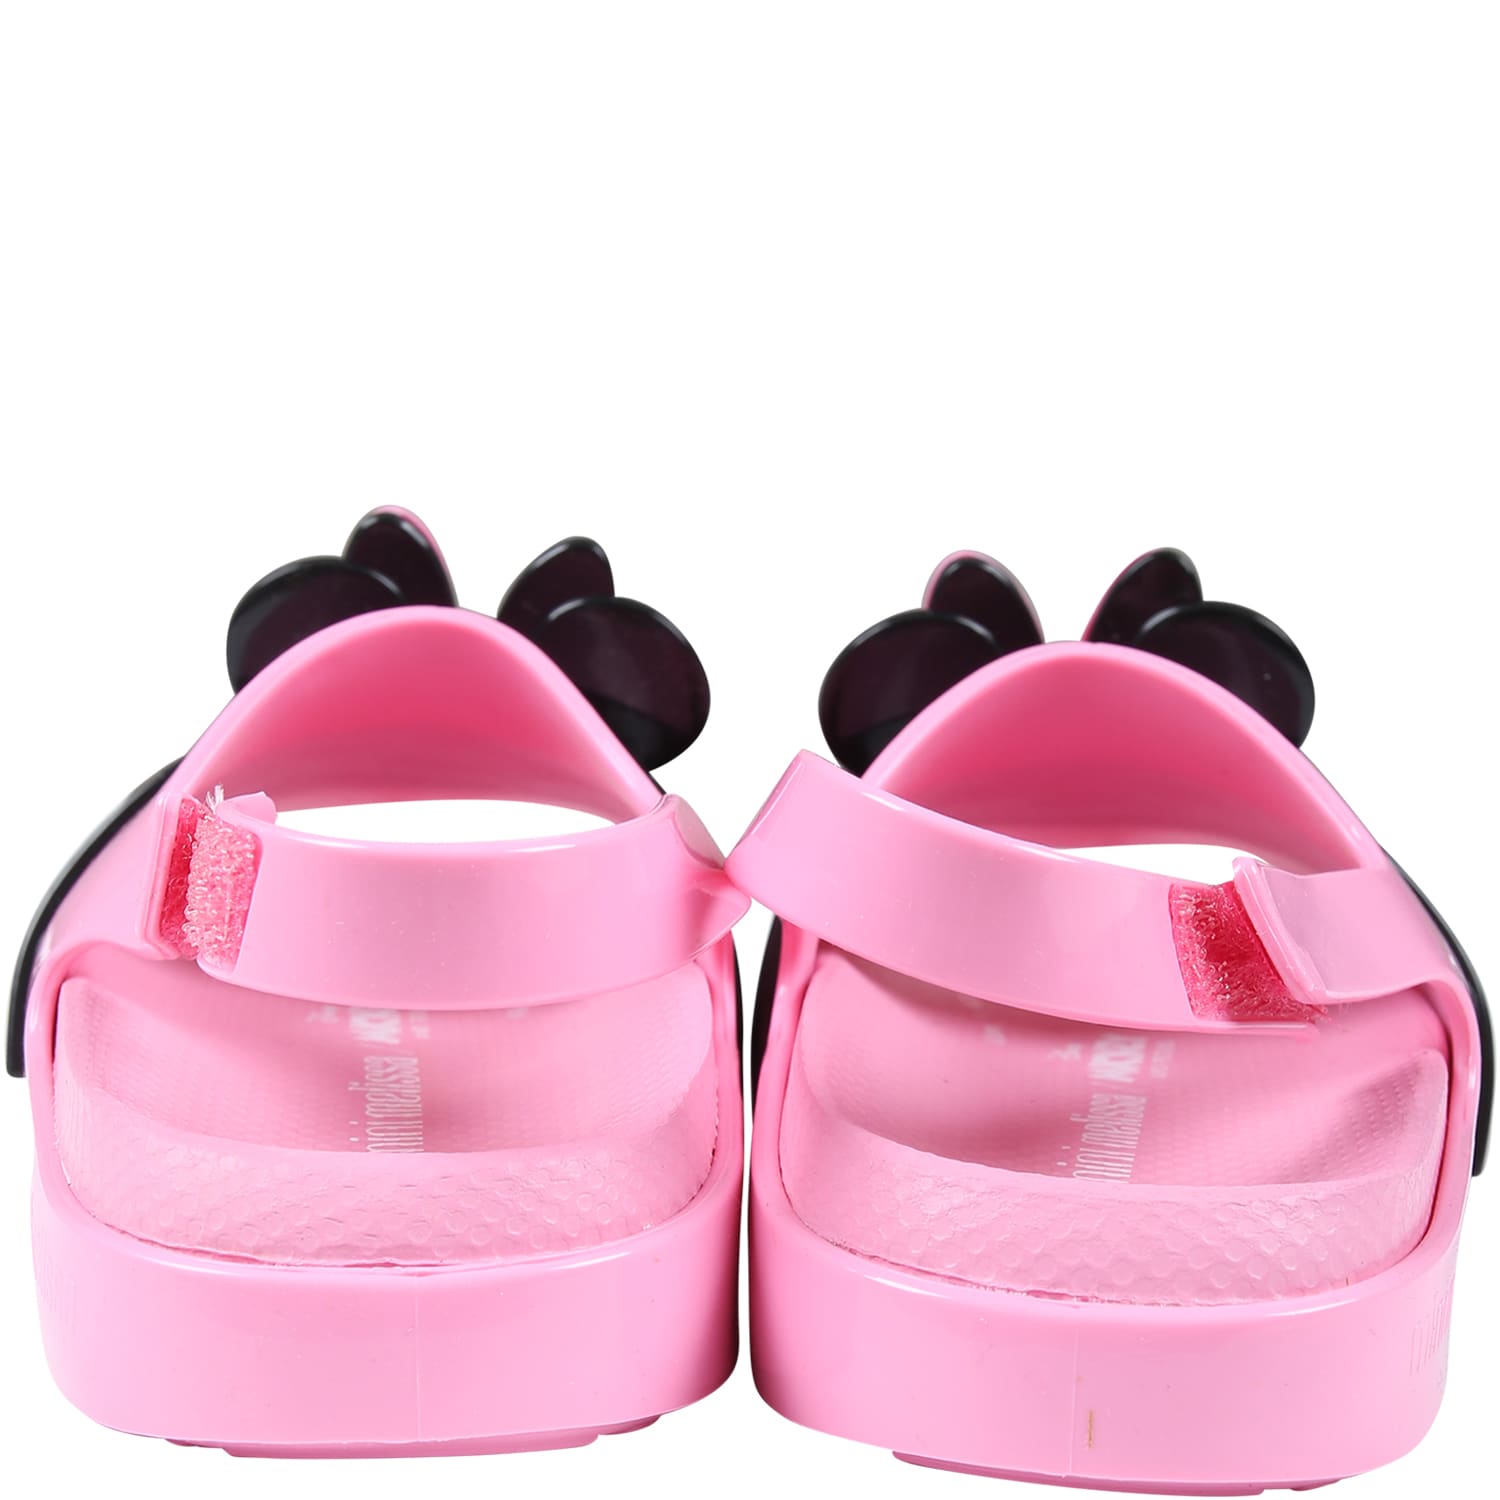 Shop Melissa Pink Sandals For Girl With Minnie Ears